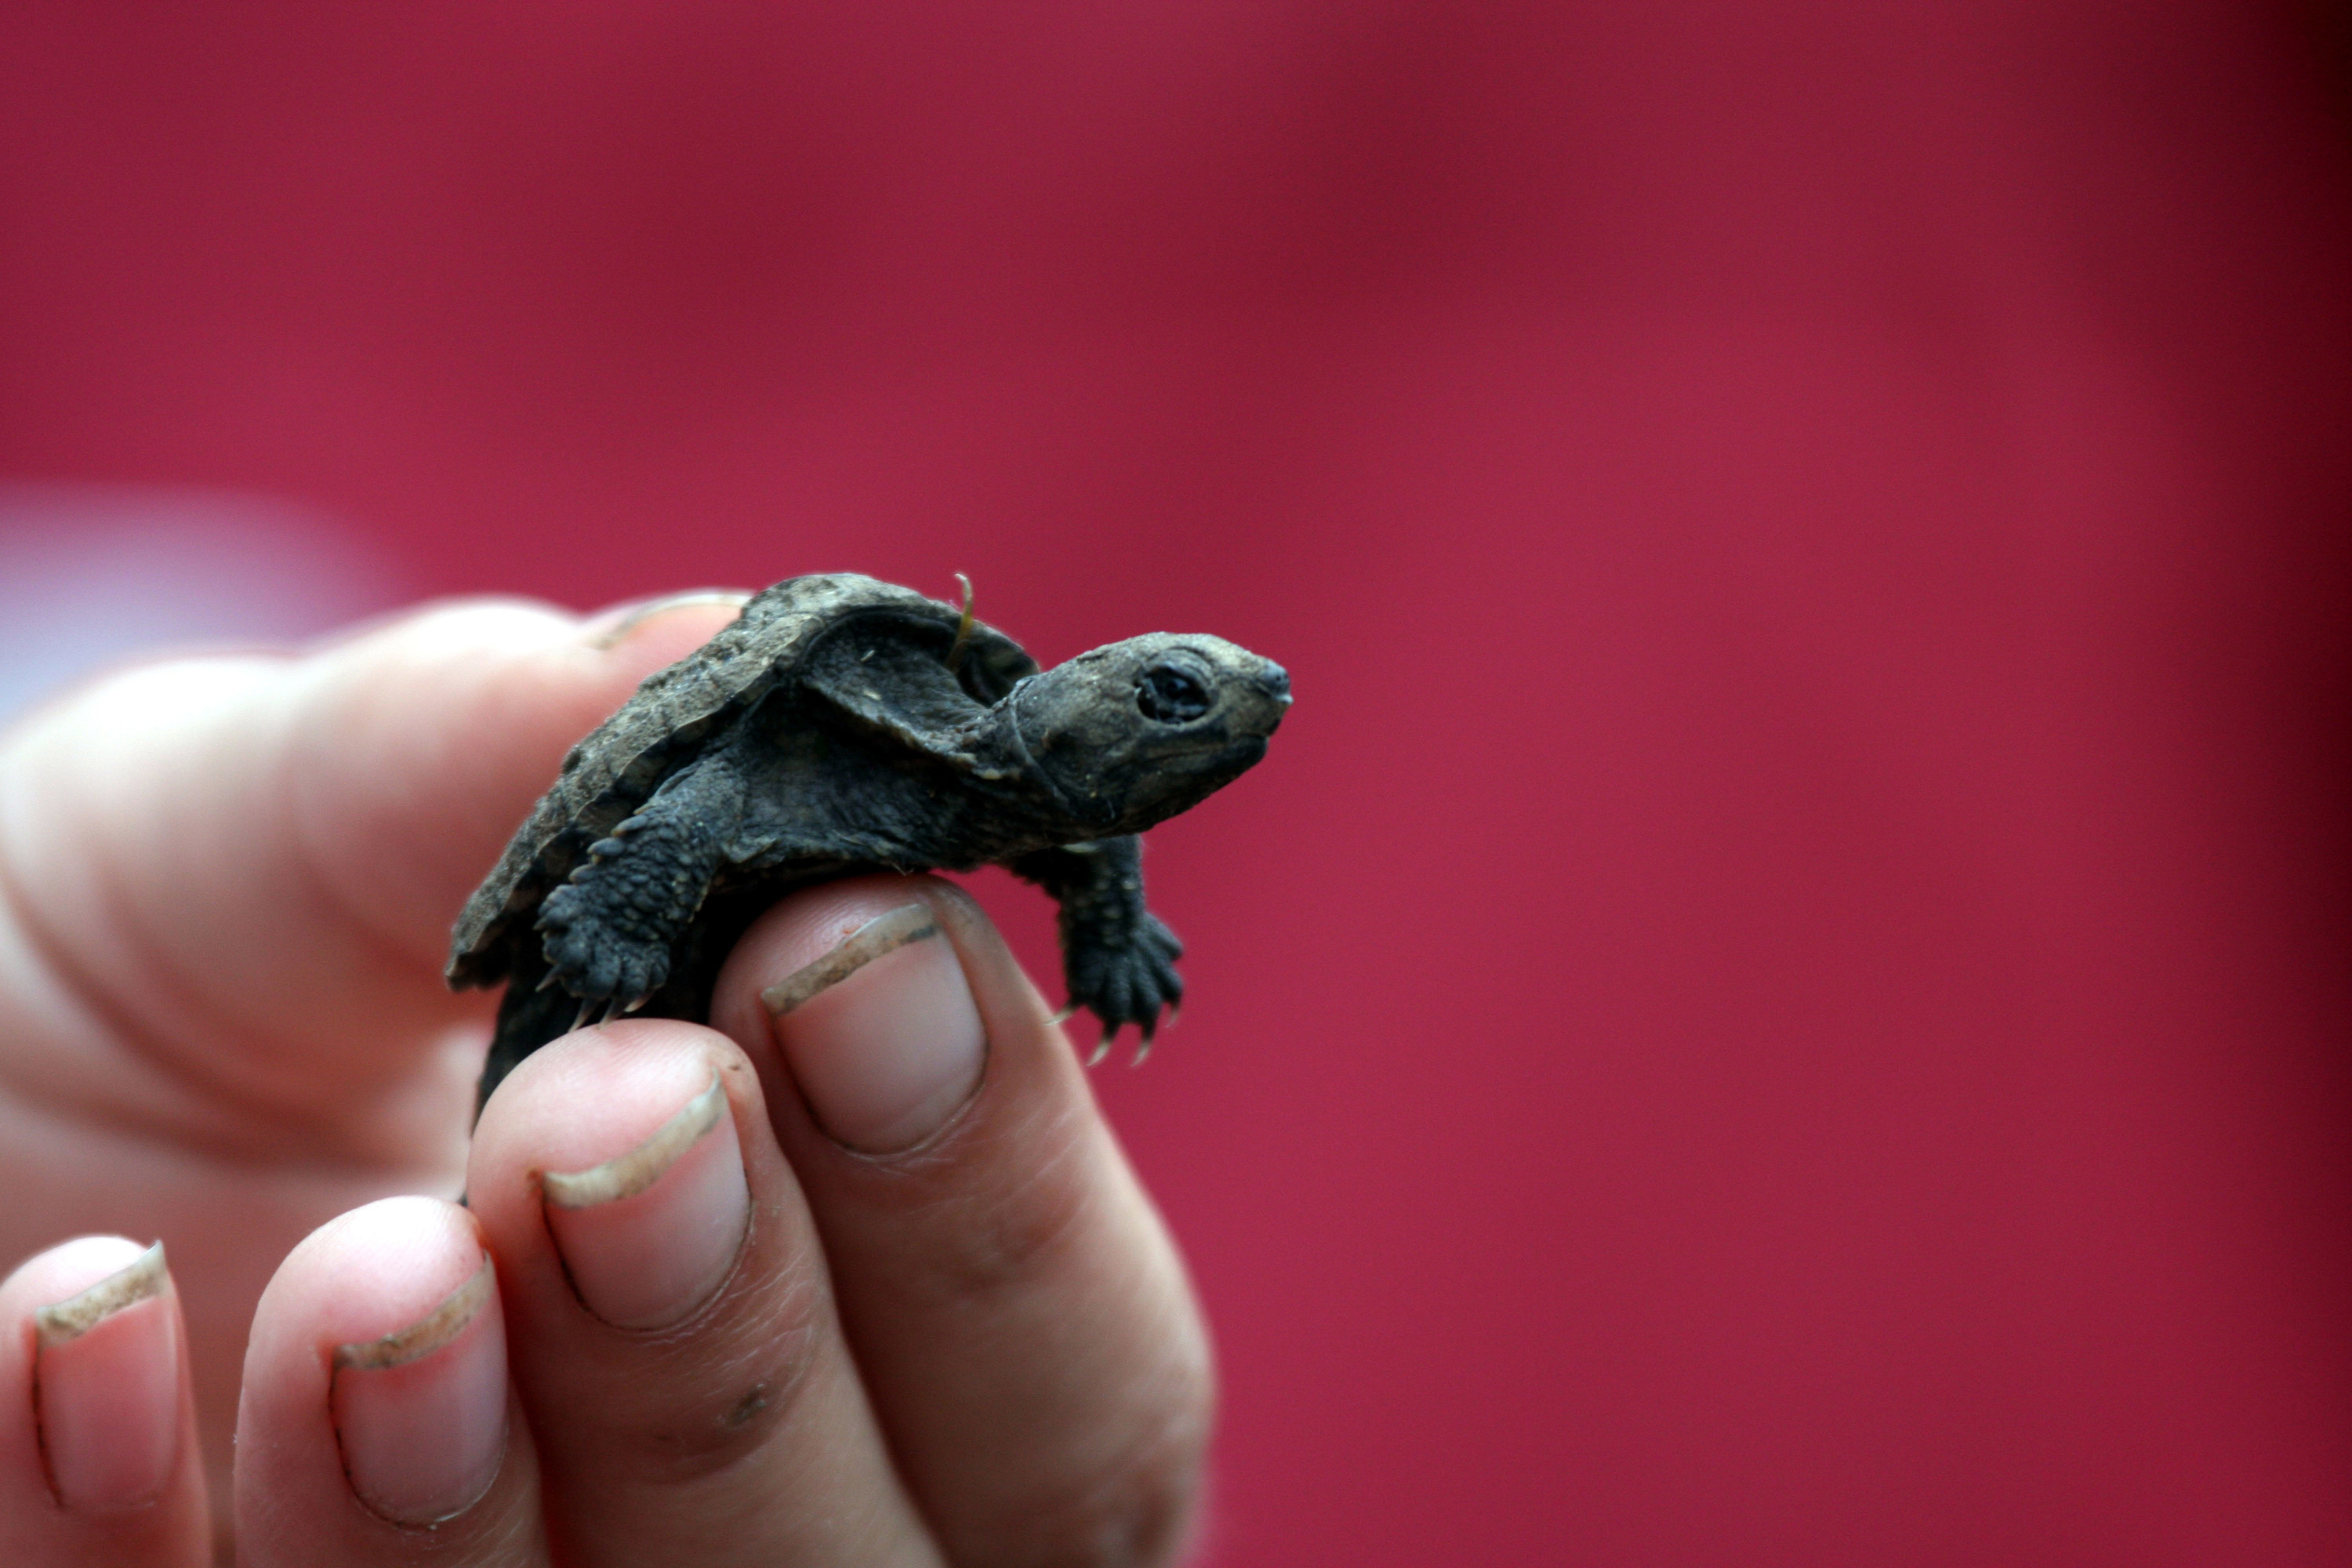 A baby snapping turtle